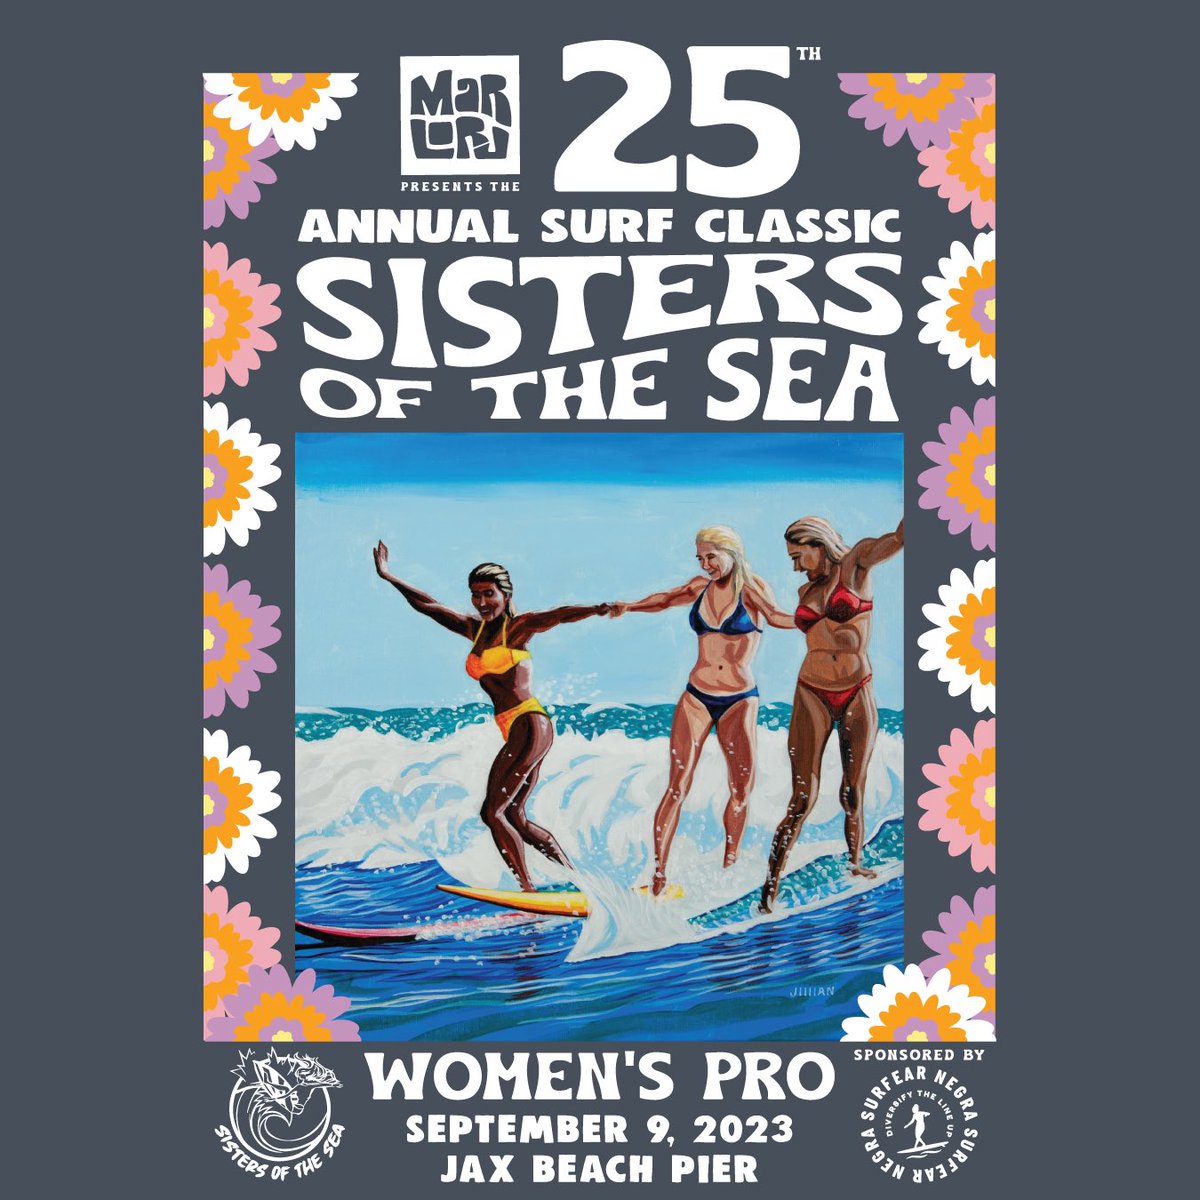 MarLoru presents our 25th Annual Pro/AM  September 9, 2023

A few spots left. Secure your spot today. 
-> liveheats.com/sistersofthesea

PROCEEDS TO BENEFIT @The_WCJ_ 

#BREASTCANCER and SINGLE MOTHERS

#JaxBeach #Florida #surfcompetition #inspringwomen